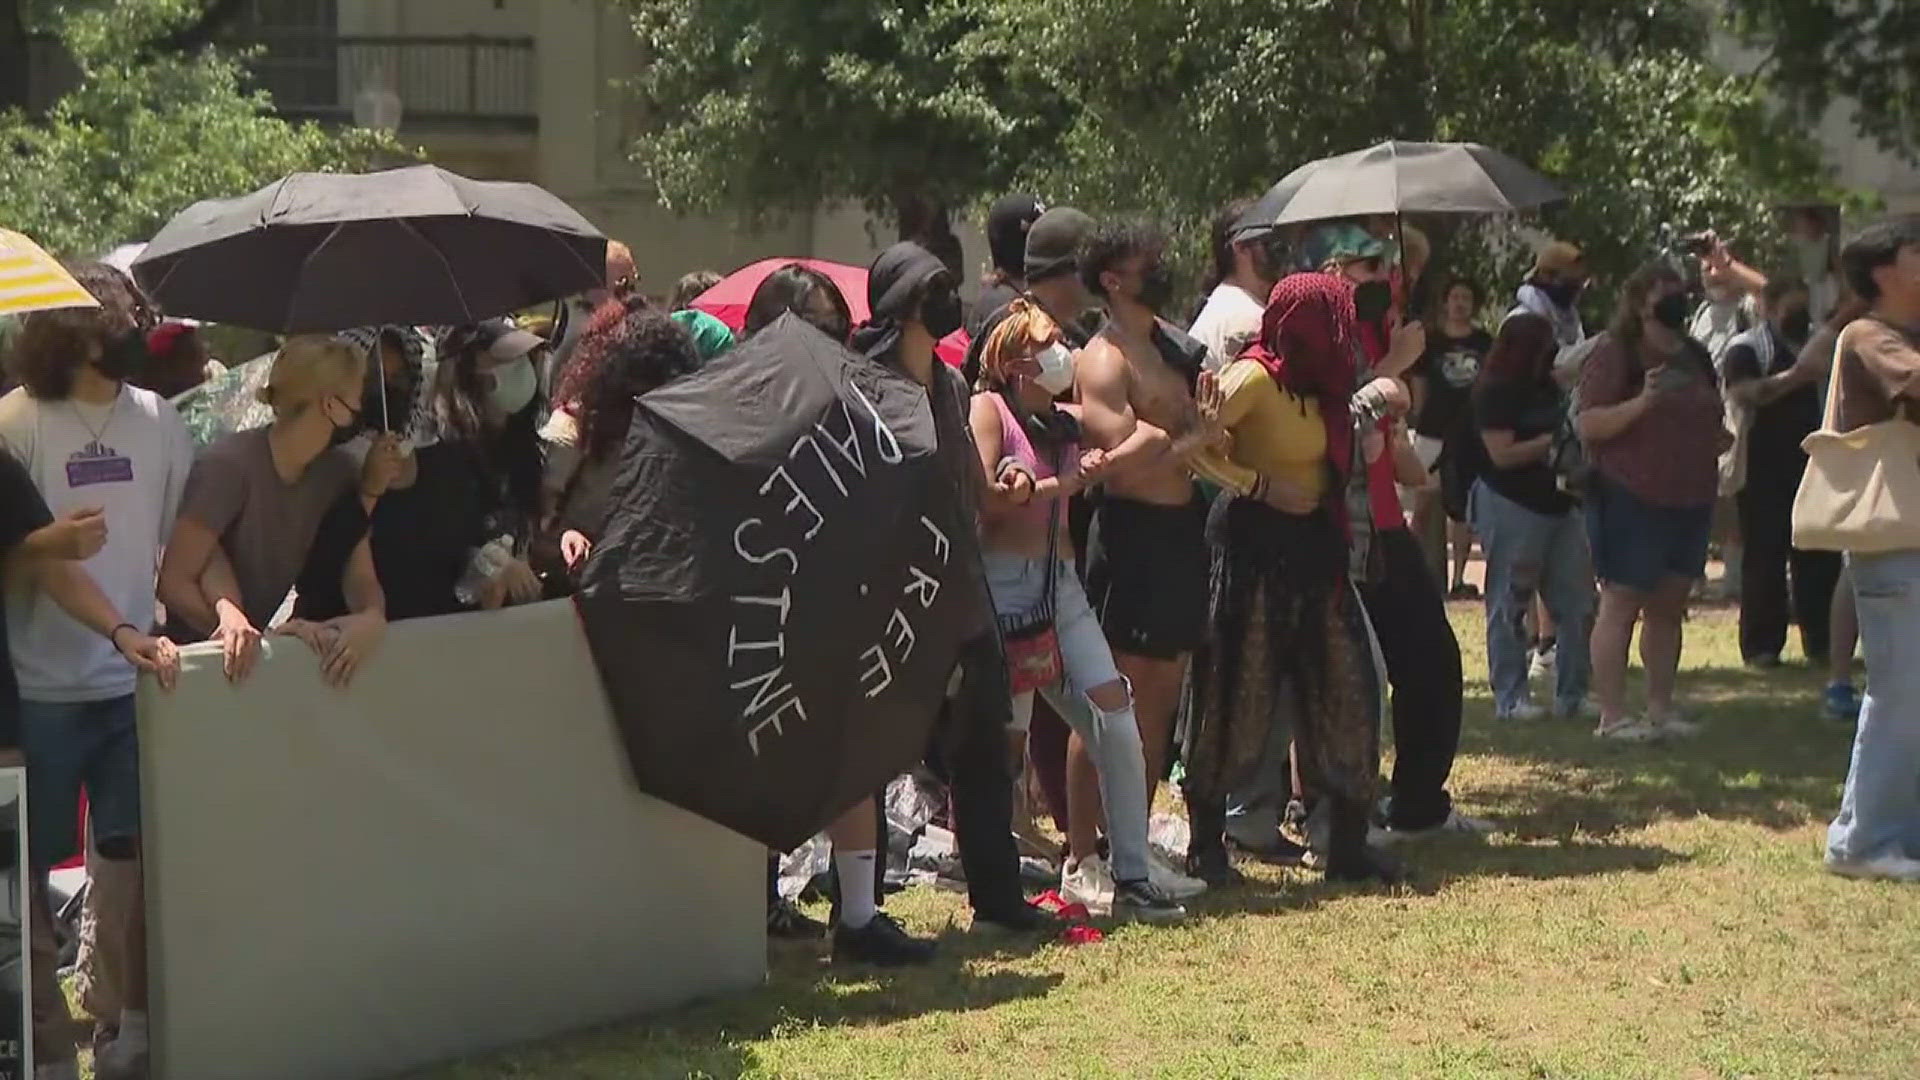 Dozens of people were arrested at the University of Texas in Austin.